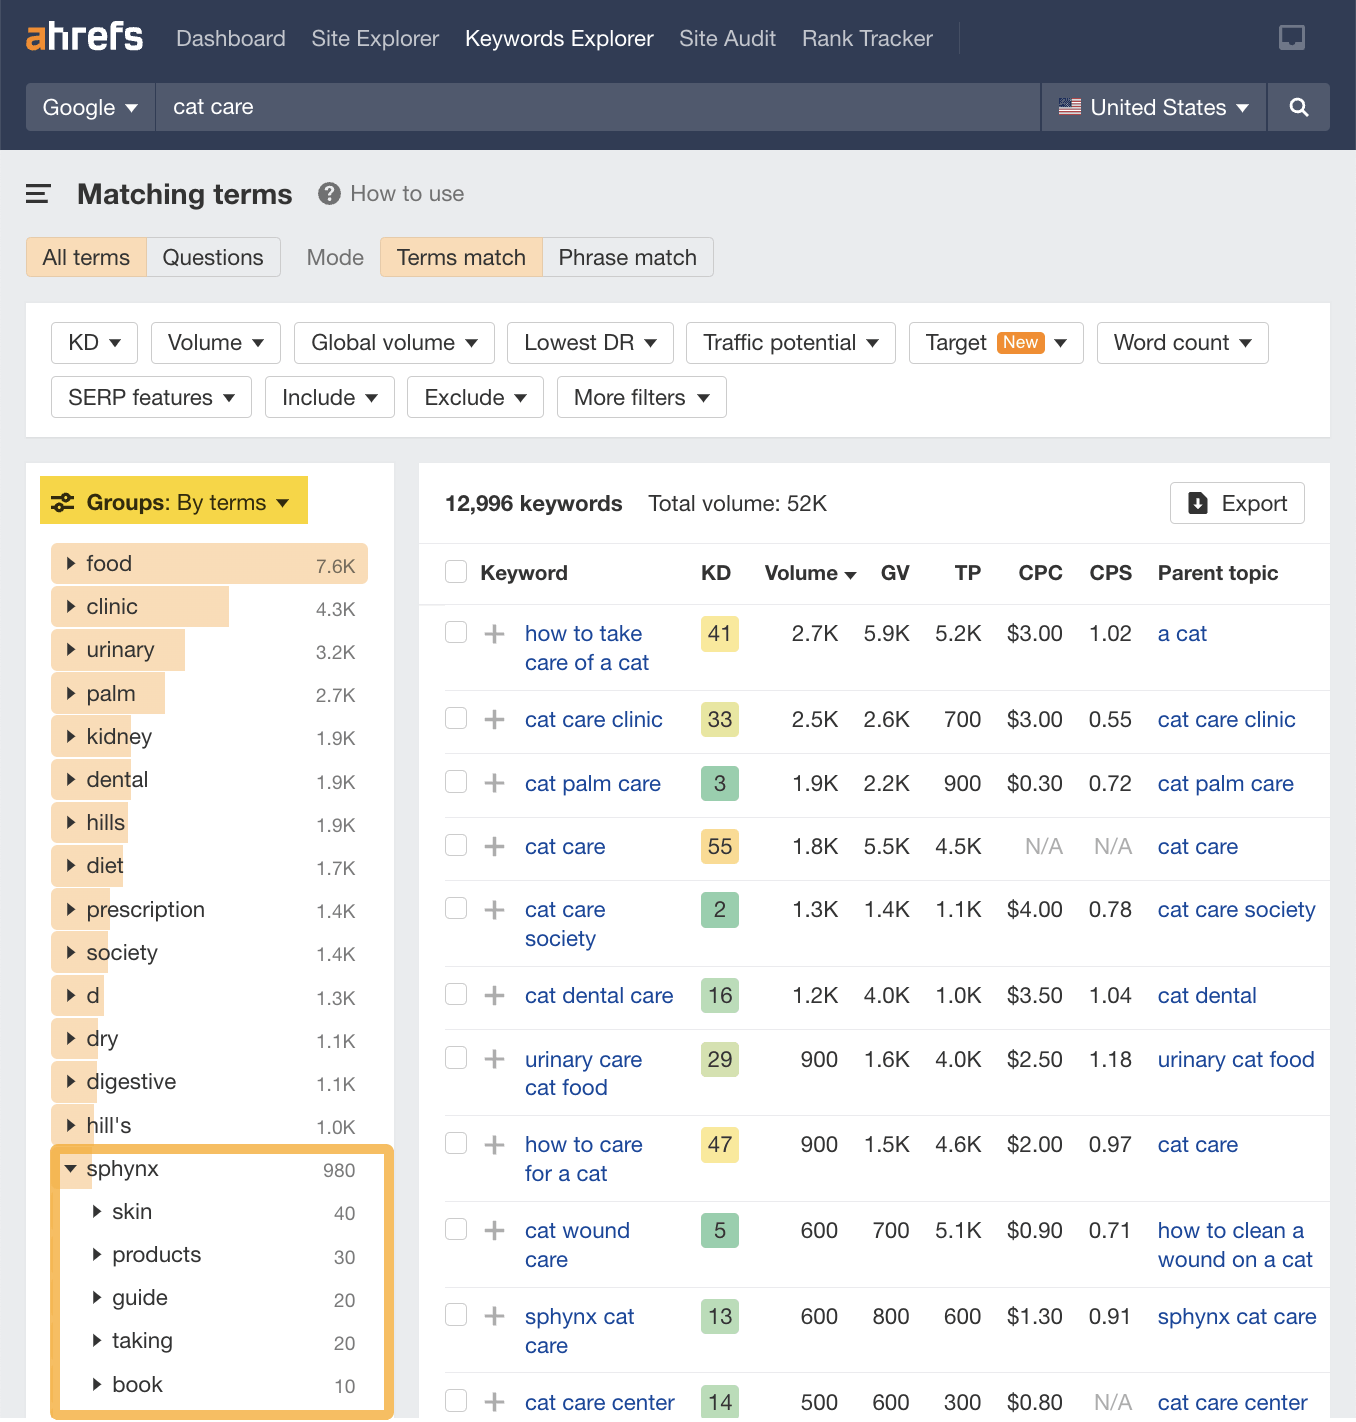 Keyword research groups using the Mat،g terms report, via Ahrefs' Site Explorer